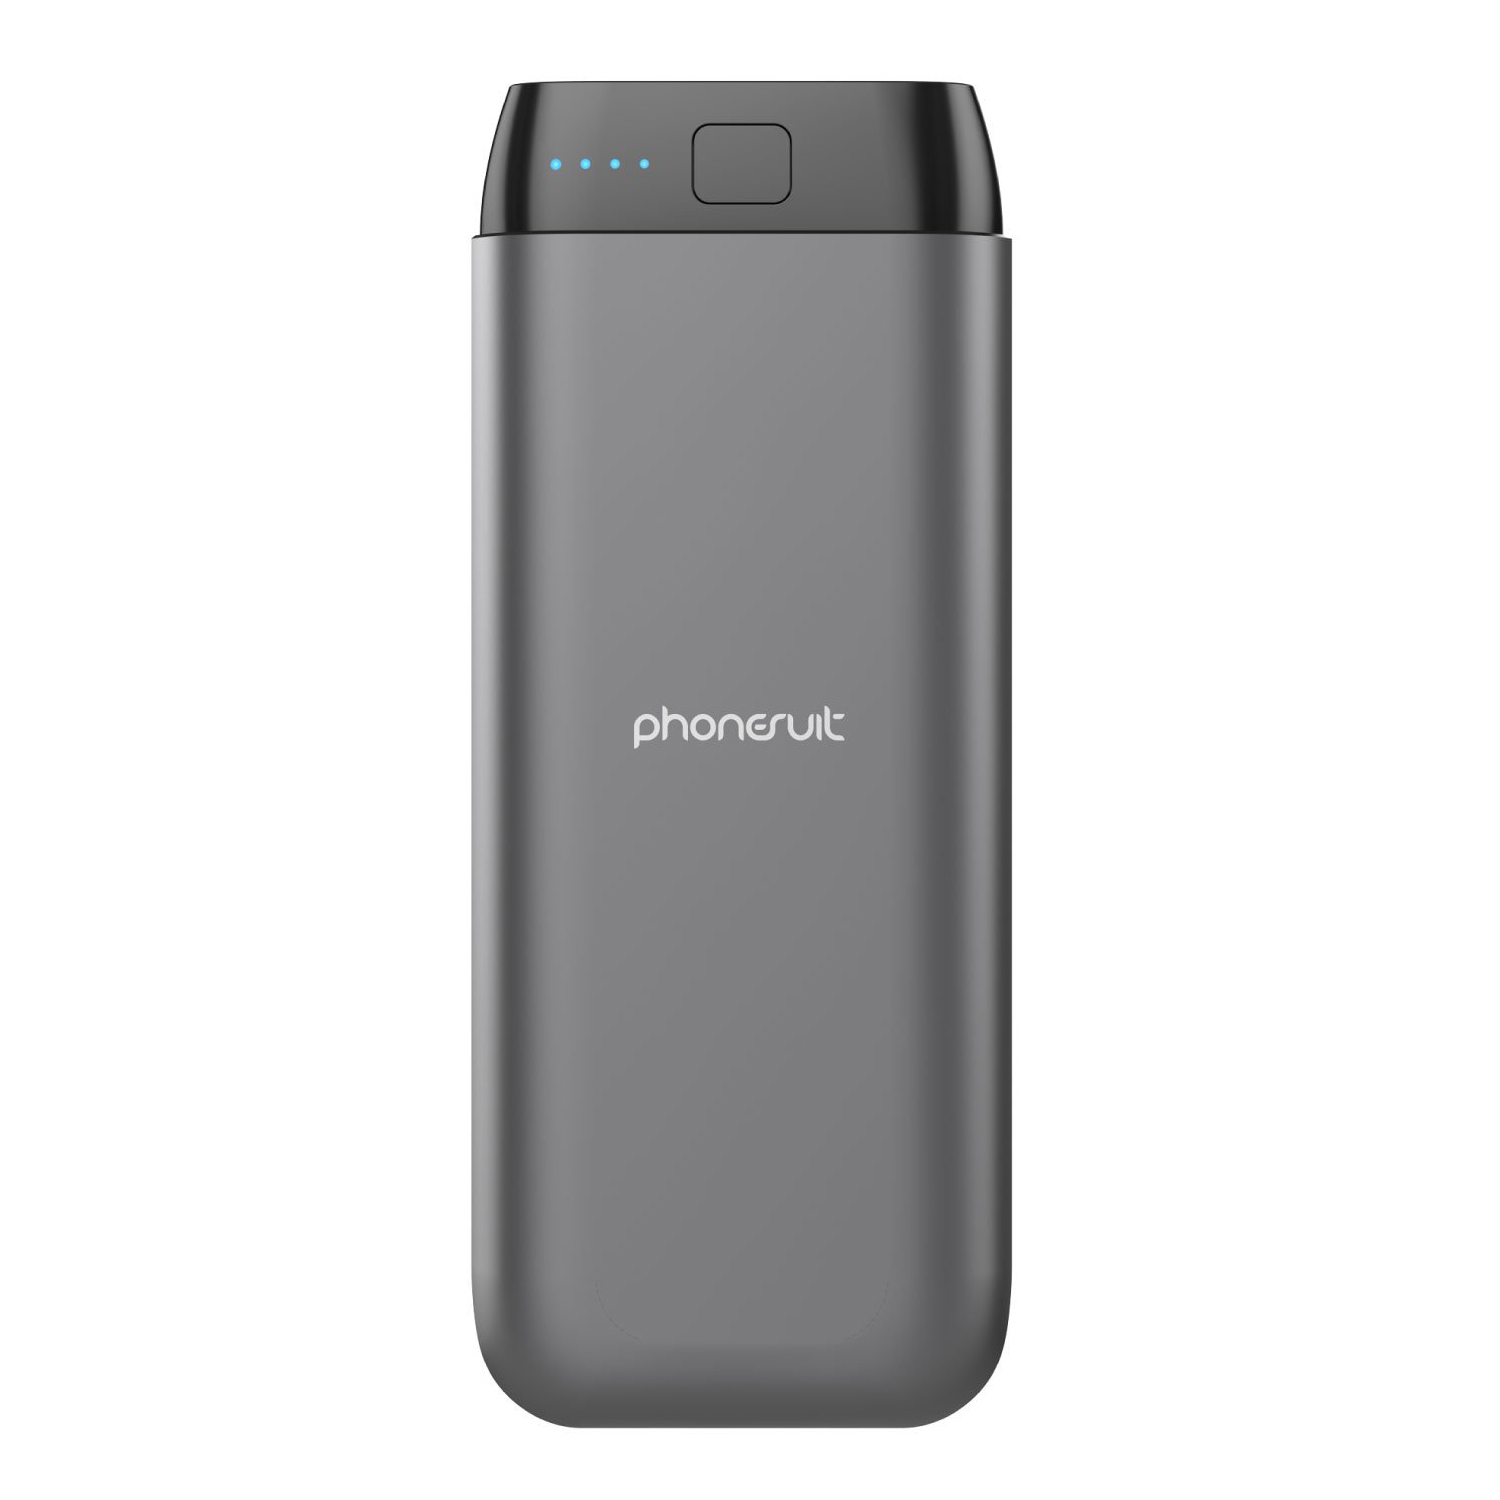 PhoneSuit Energy Core Max Power Bank 20,000mAh for iPhone, SAMSUNG and More - image 5 of 6